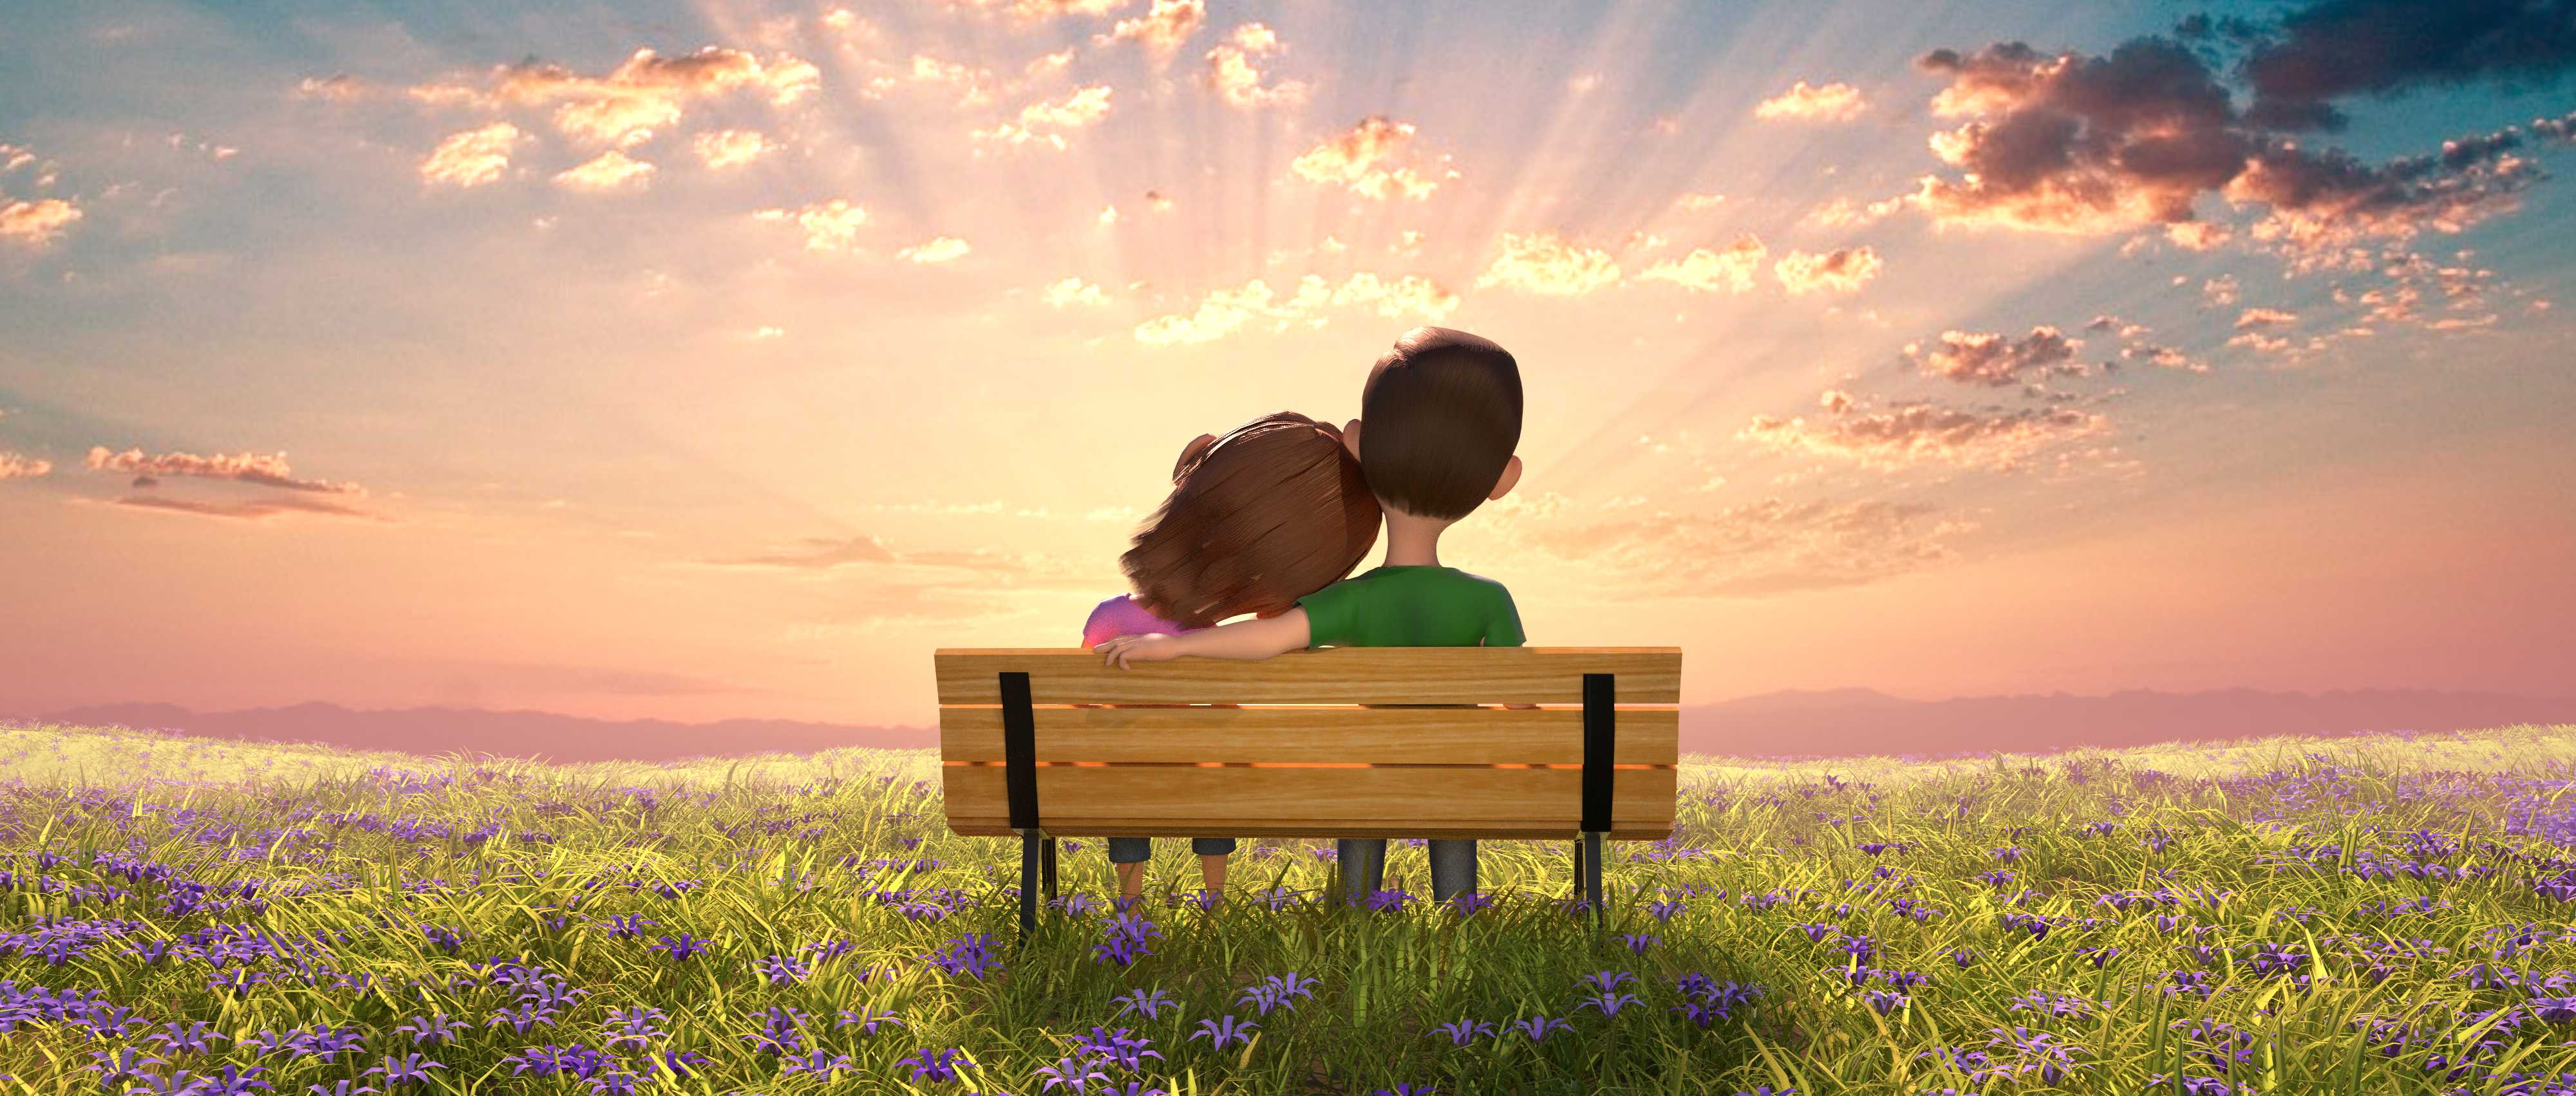 Couple Sitting on a Bench